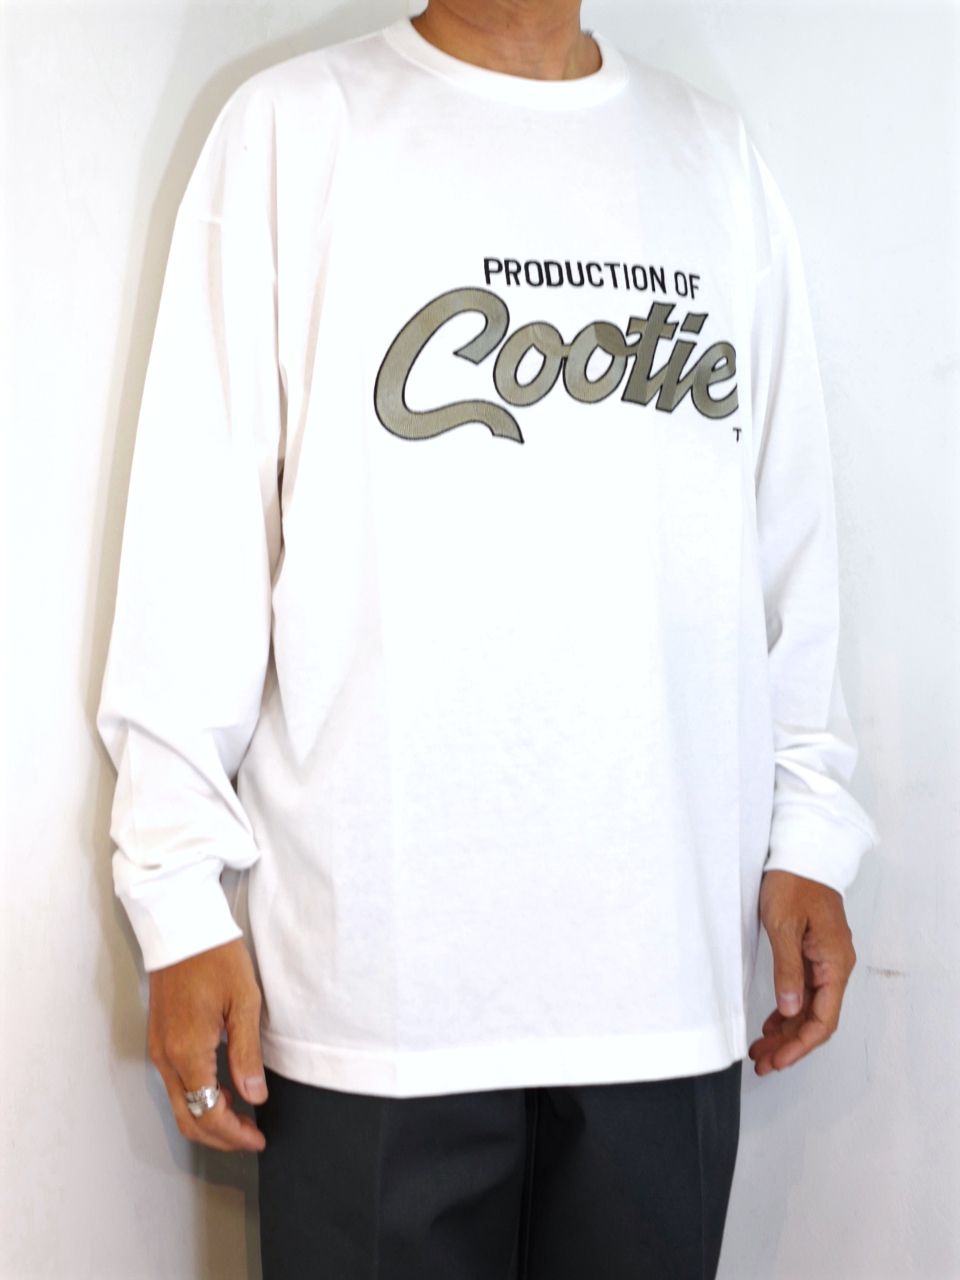 COOTIE PRODUCTIONS - Embroidery Oversized L/S Tee (PRODUCTION OF 